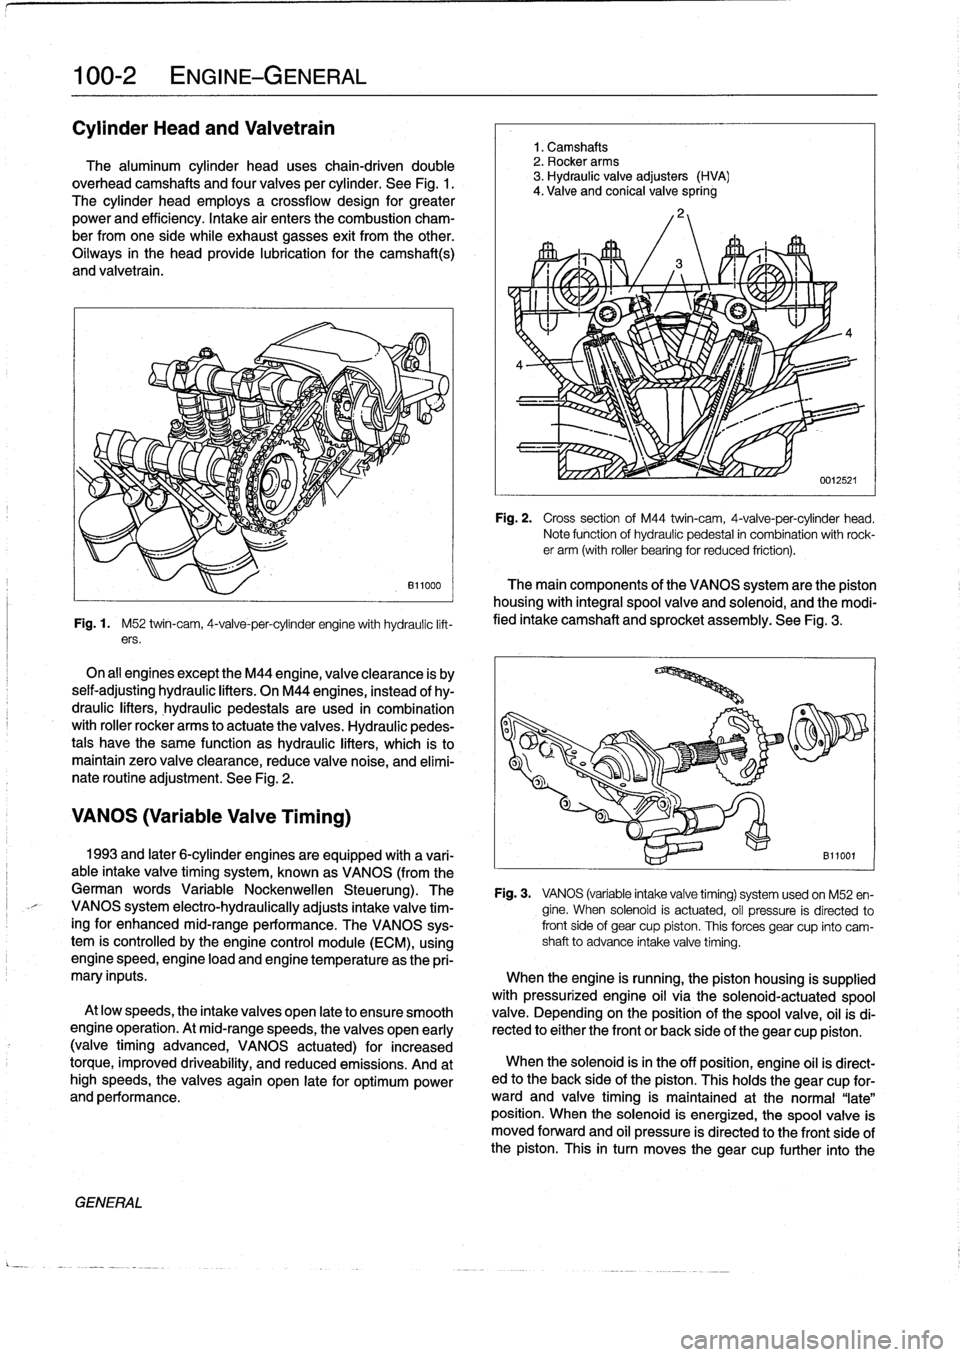 BMW 318i 1997 E36 Owners Manual 
100-2
ENGINE-GENERAL

Cylinder
Head
and
Valvetrain

The
aluminum
cylinder
head
uses
chain-driven
double
overhead
camshafts
and
four
valves
per
cylinder
.
See
Fig
.
1
.

The
cylinder
head
employs
a
cr